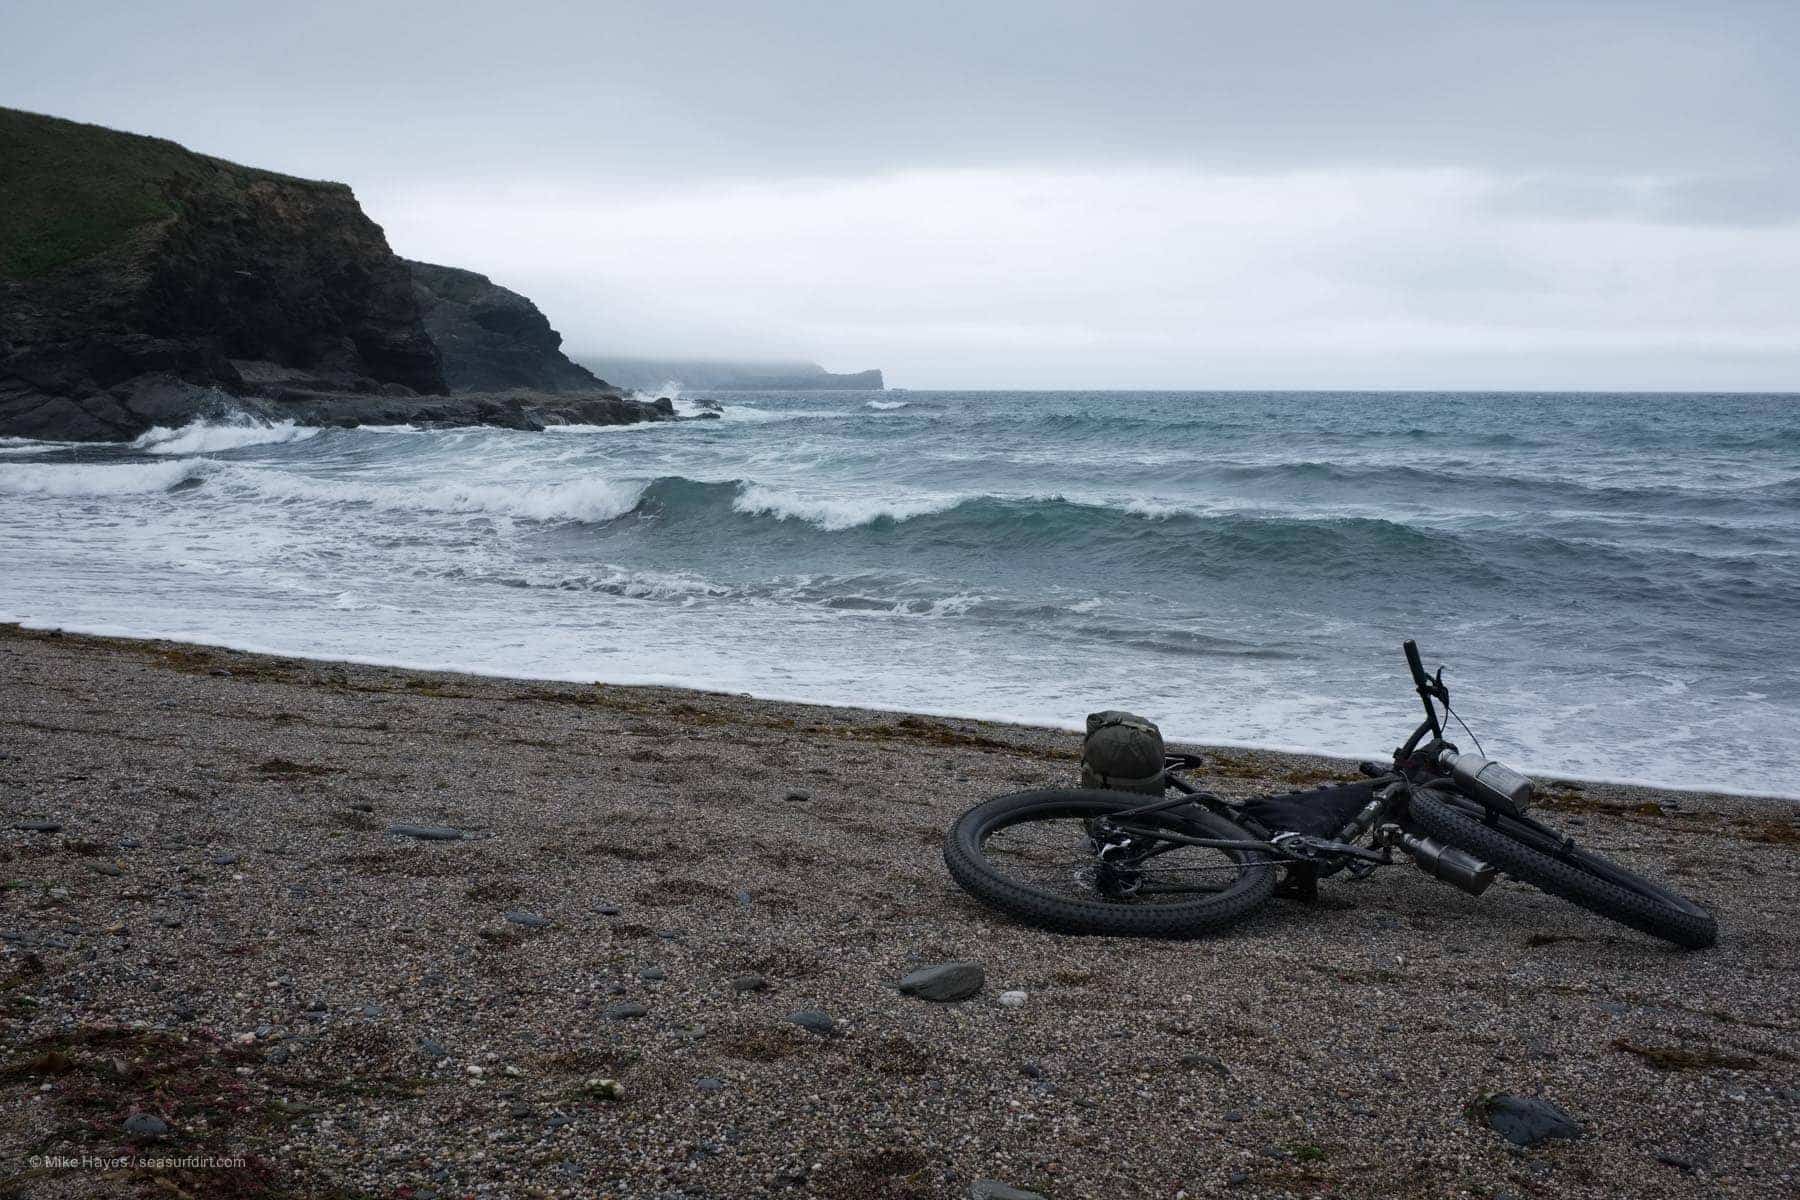 Surly ECR lying on the sand in front of breaking surf on a wet evening